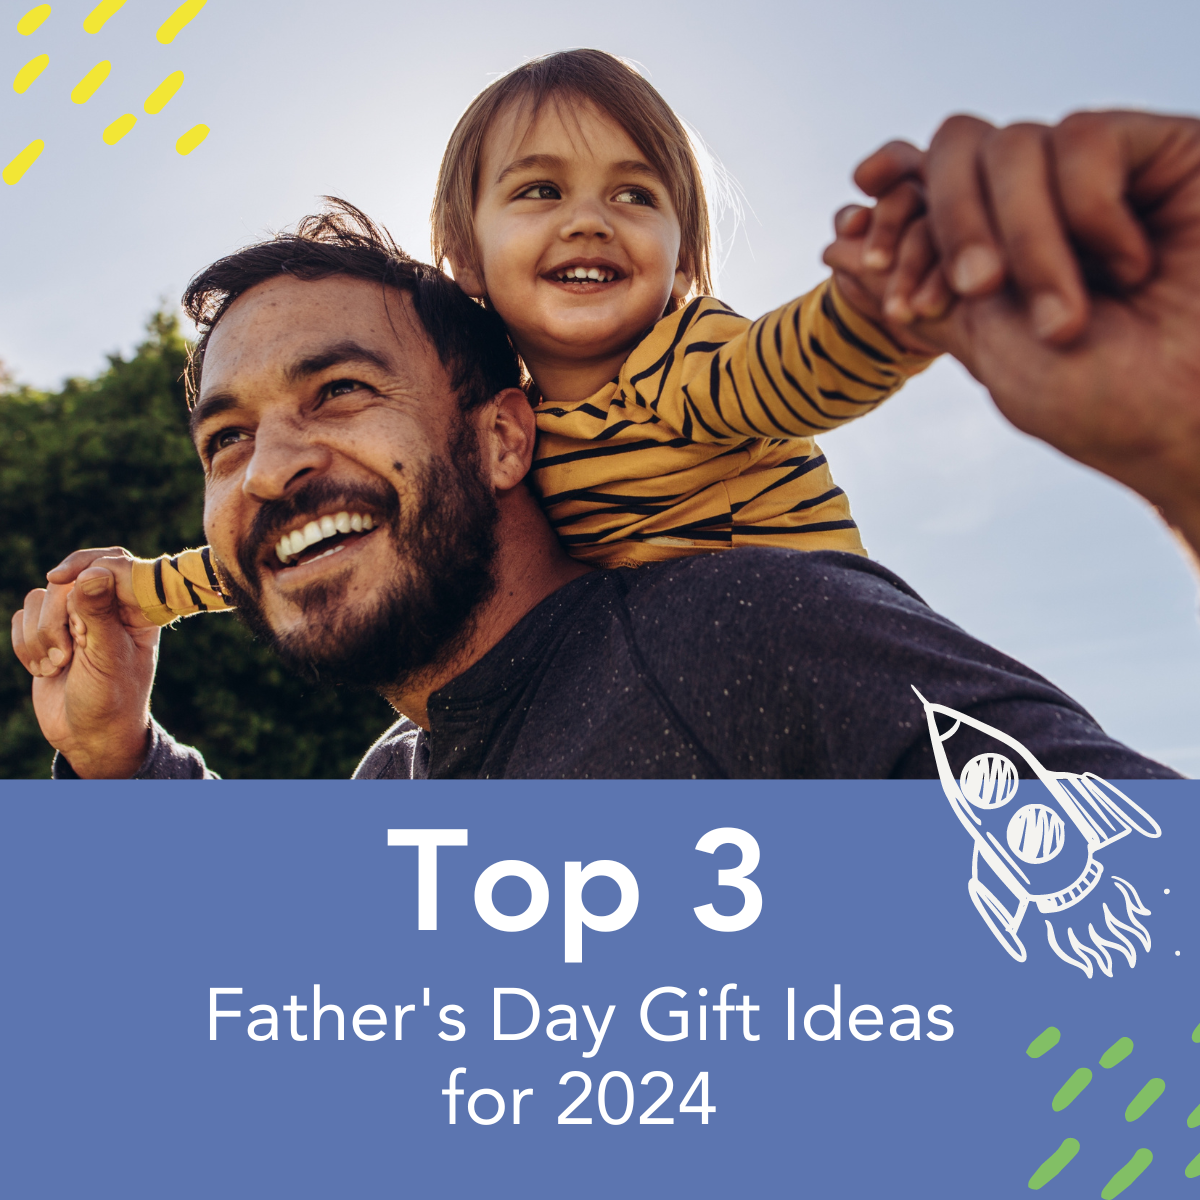 Top 3 Father's Day Gift Ideas for 2024